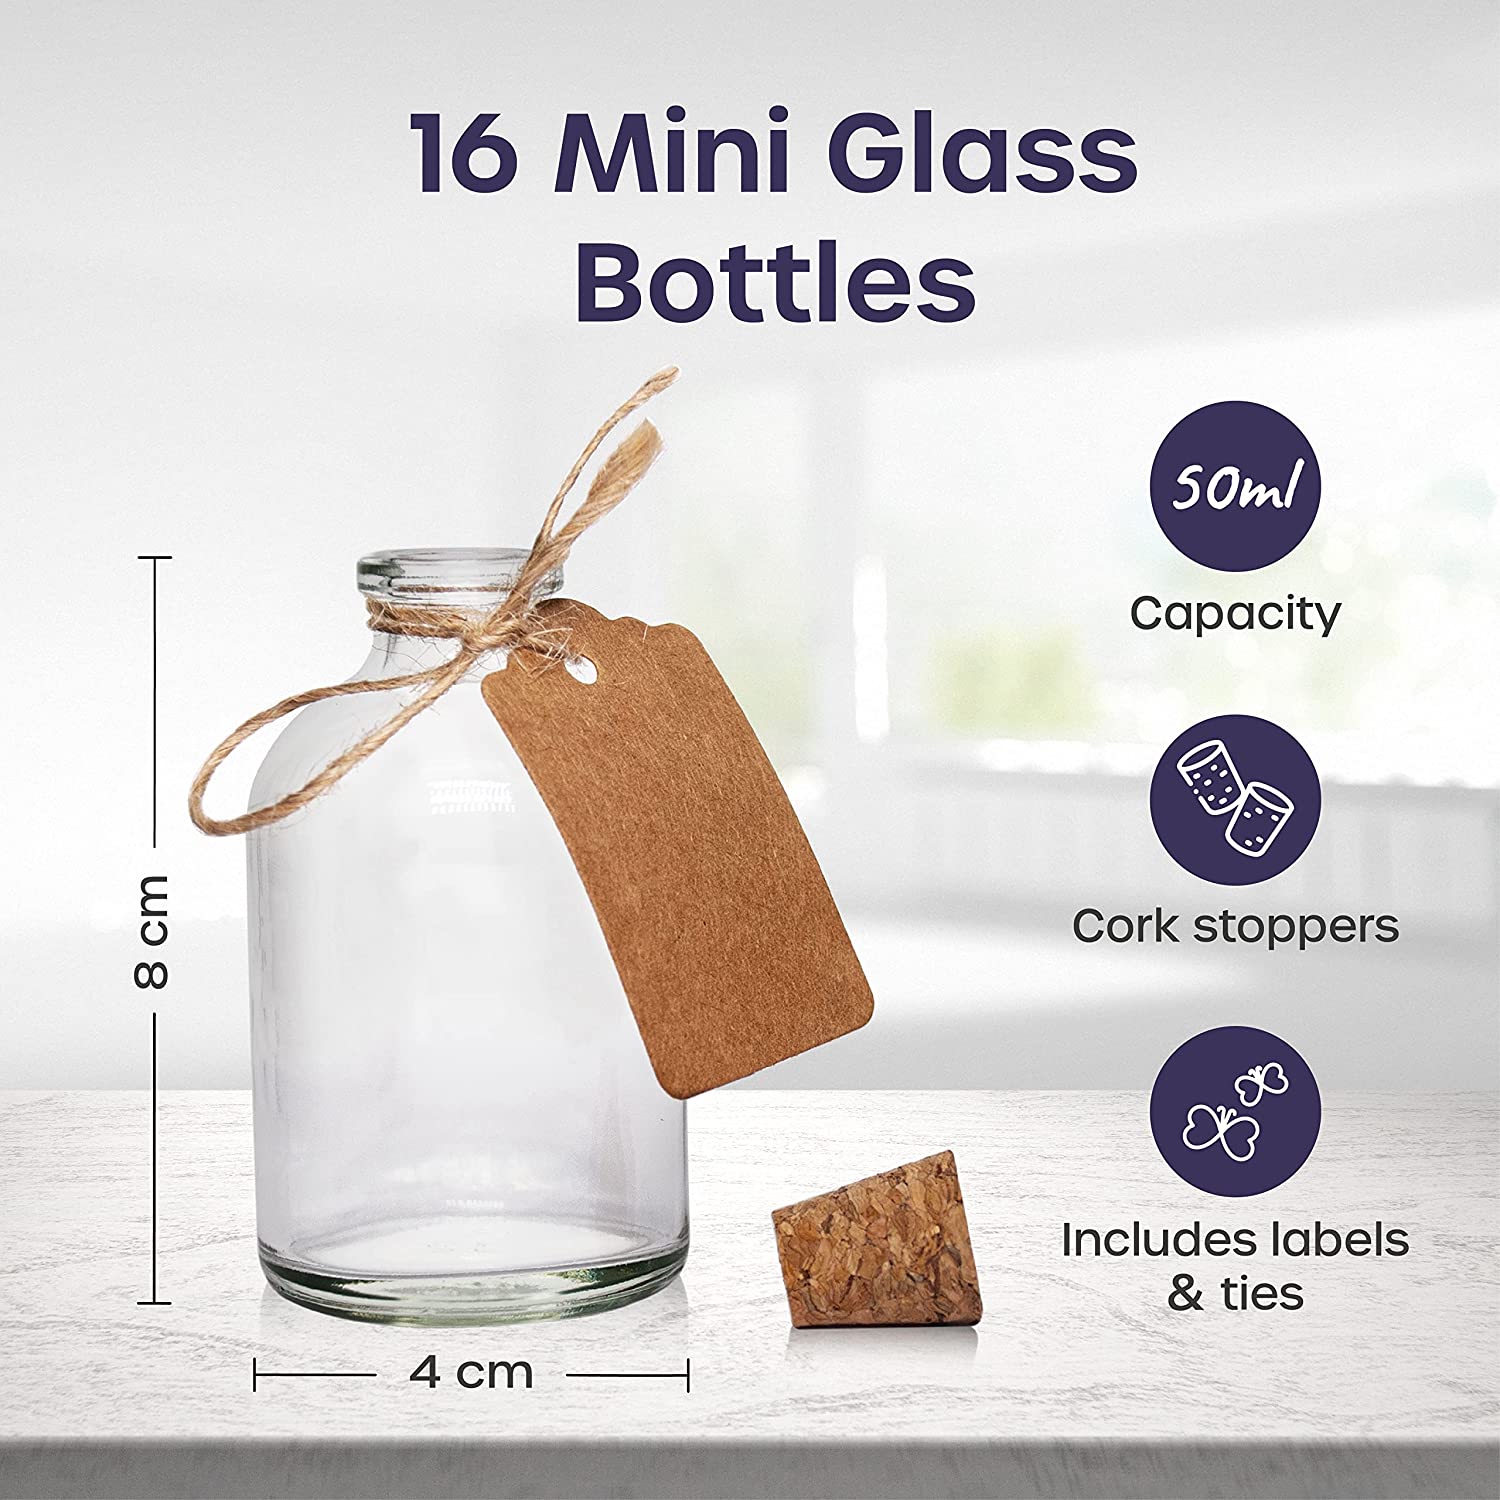 Mini Glass bottles Product Features